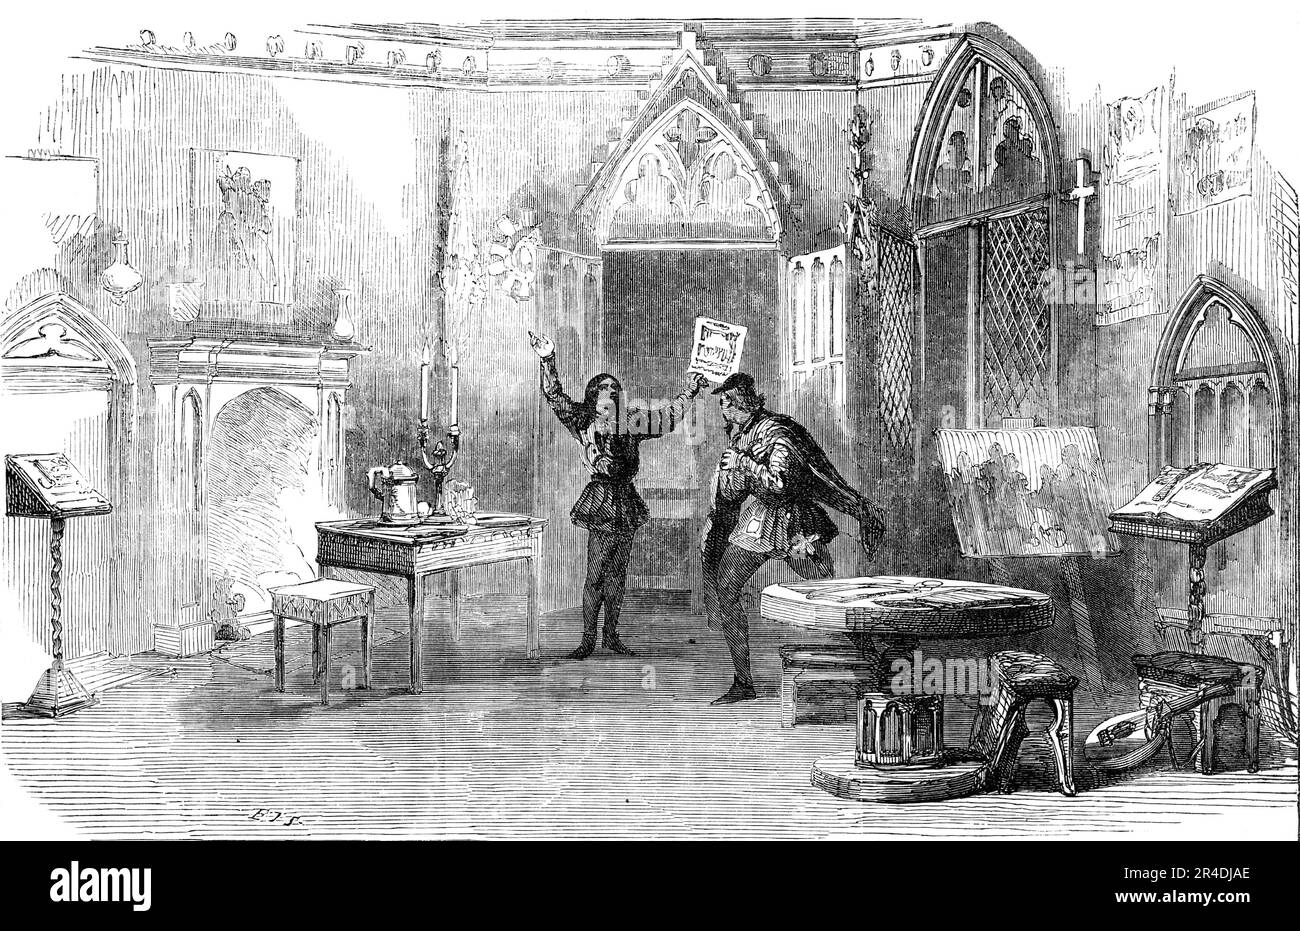 Scene from the New Play of &quot;The First Printer&quot;, at the Princess' Theatre, 1856. London stage production: '...the second act...the two principal characters - the hero and the evil genius of the piece - Laurence Costar (Mr. Charles Kean), and John of Gutenberg (Mr. [John] Ryder). Costar, in the simplicity and confidence of his soul, has just divulged the secret of his printing-press to his crafty compeer; and the two are making impressions of a revolutionary document which the former has undertaken to copy. It is in this portion of the performance that Costar bequeaths the art of print Stock Photo